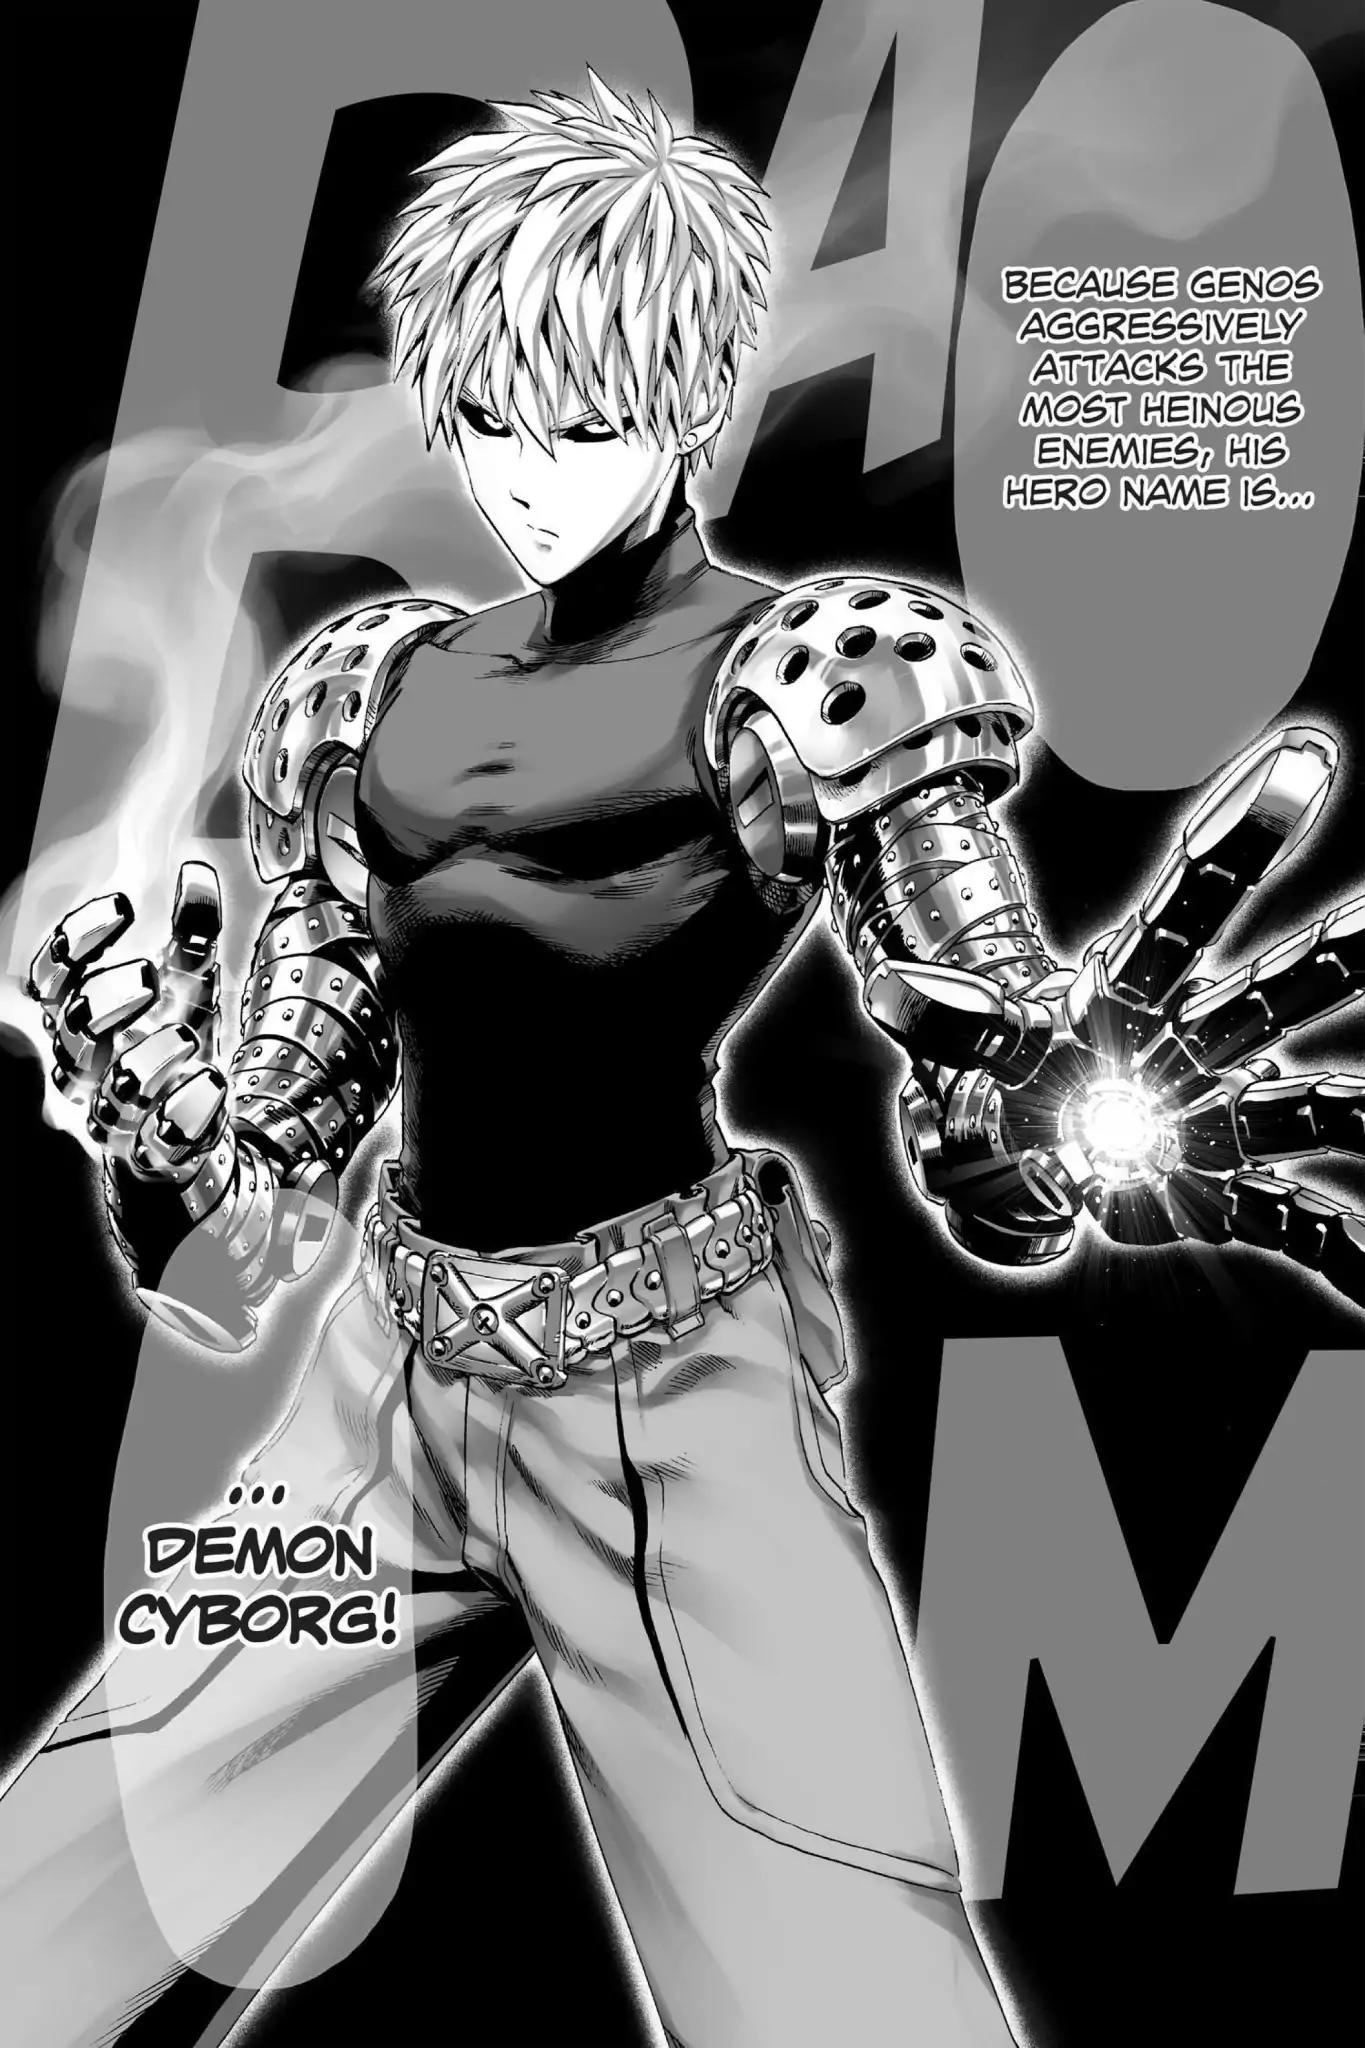 One Punch Man, Chapter 45 Hero Name image 20